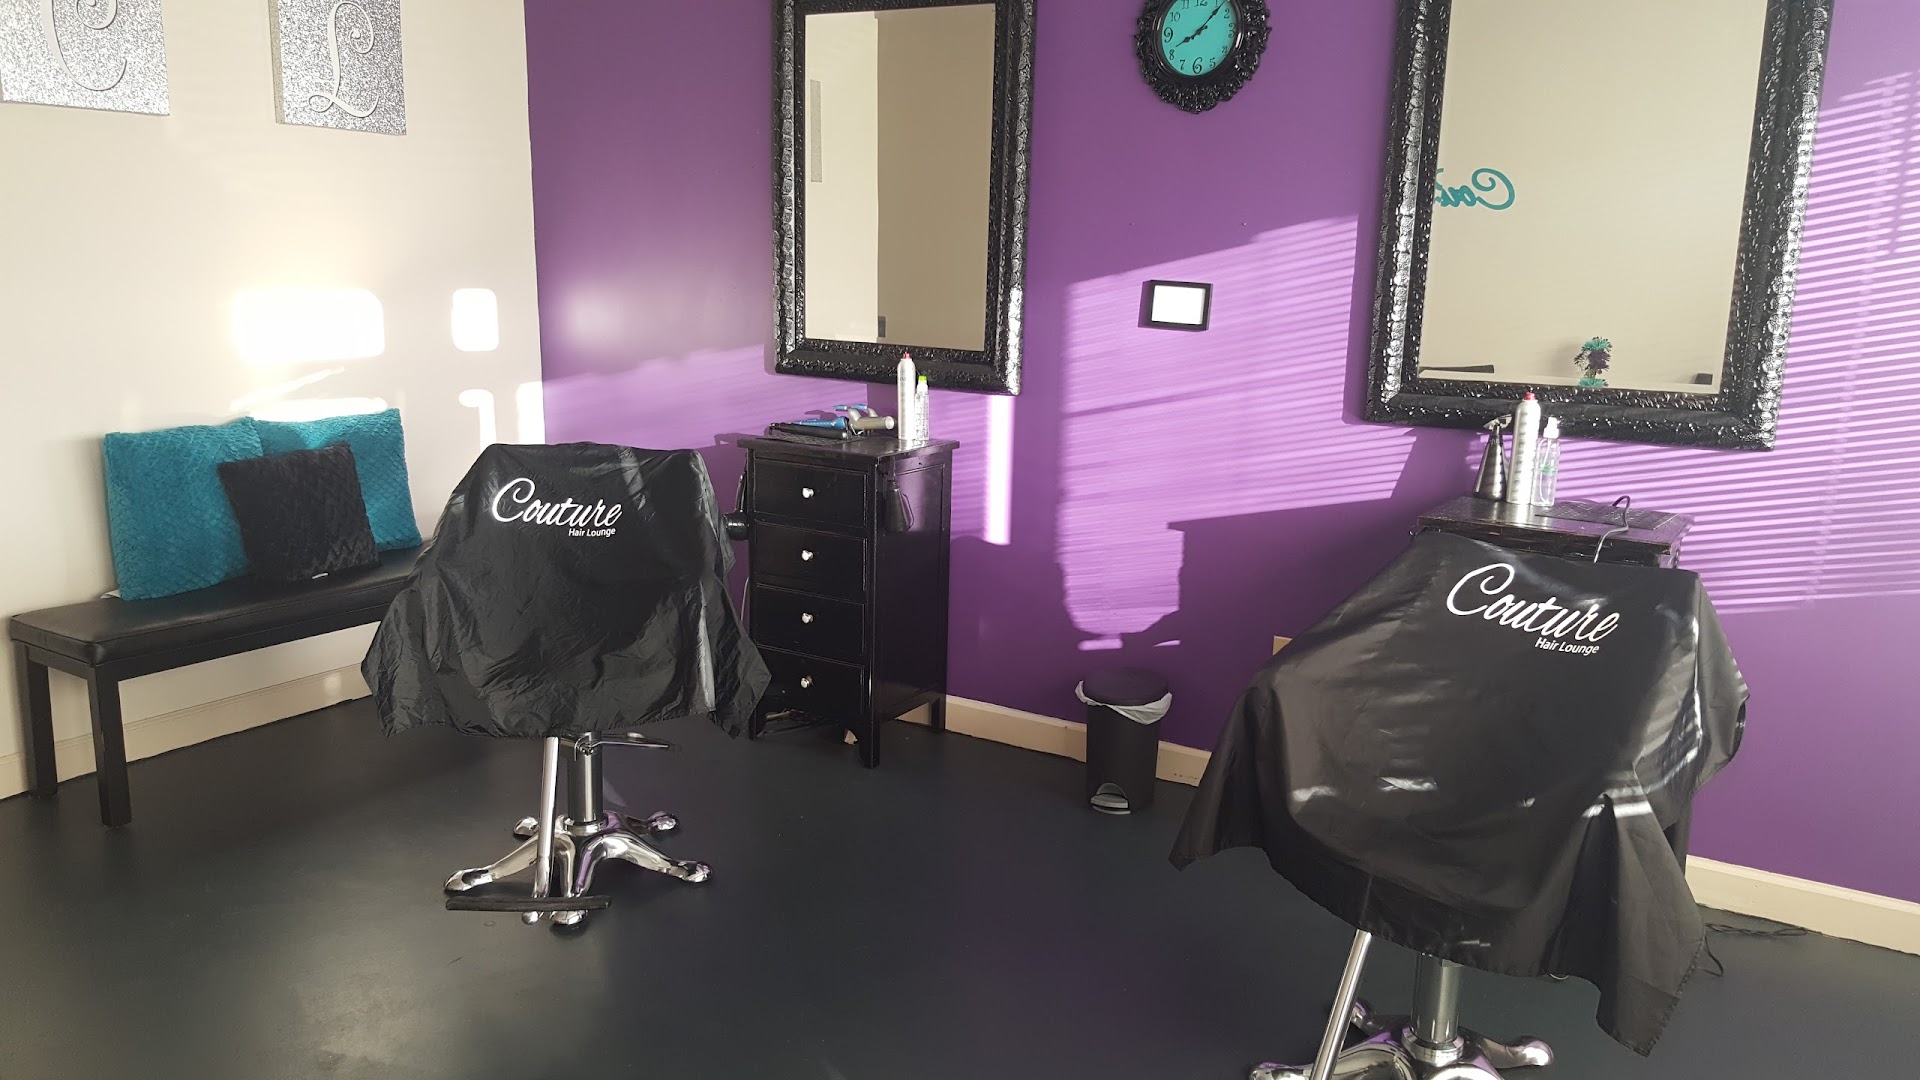 Couture Hair Lounge